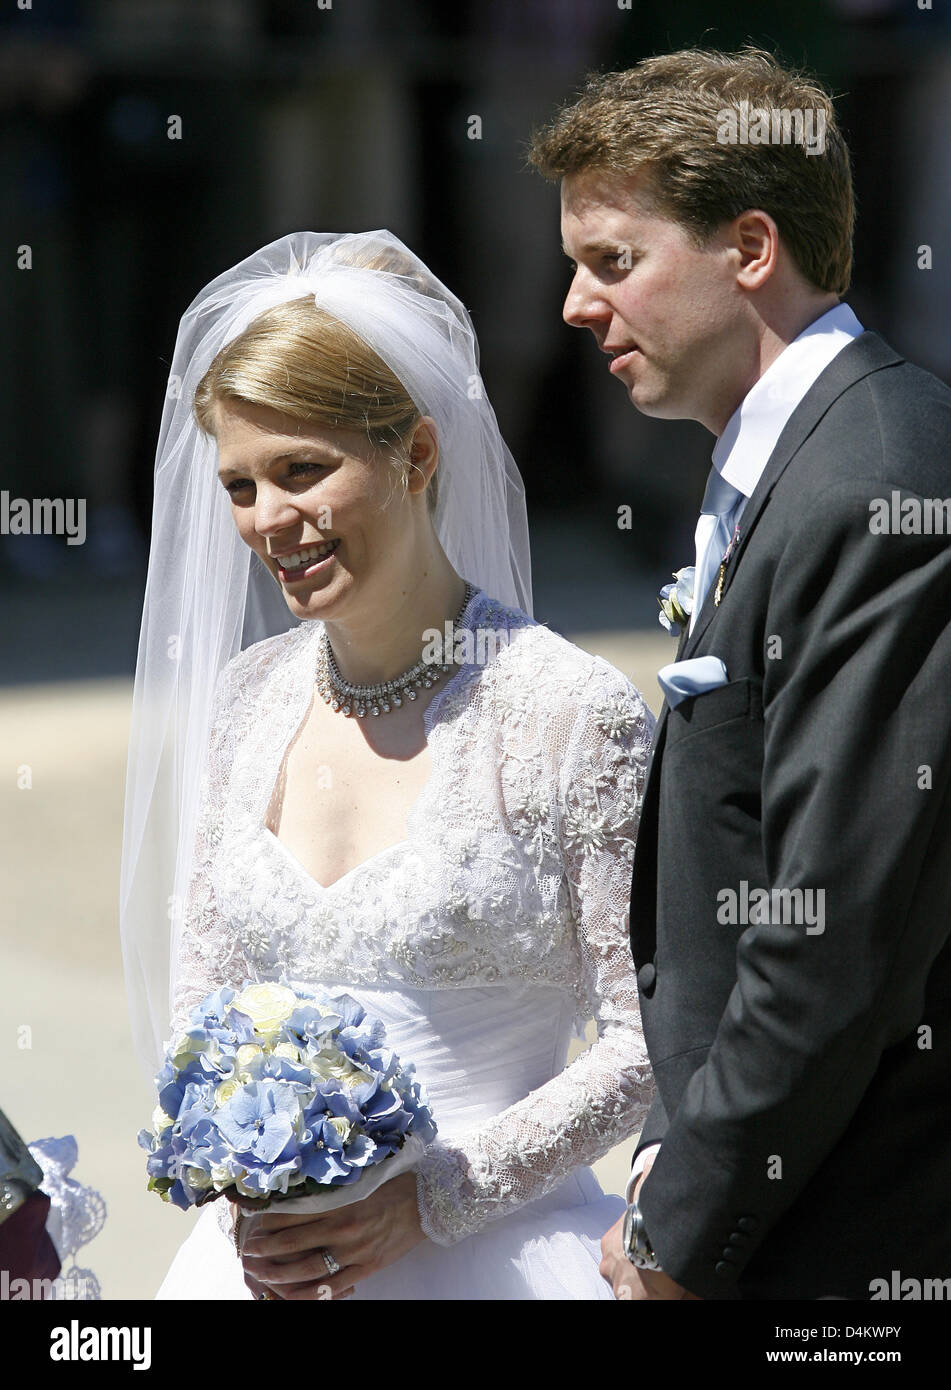 Hubertus Michael hereditary prince of Saxony-Coburg and Gotha (R) and Bride Kelly Jeanne Rondestvedt (L) leave the church after their wedding in Coburg, Germany, 23 May 2009. Some 400 guests, many of which celebrities and European aristocrats, attended the wedding. Photo: Daniel Karmann Stock Photo